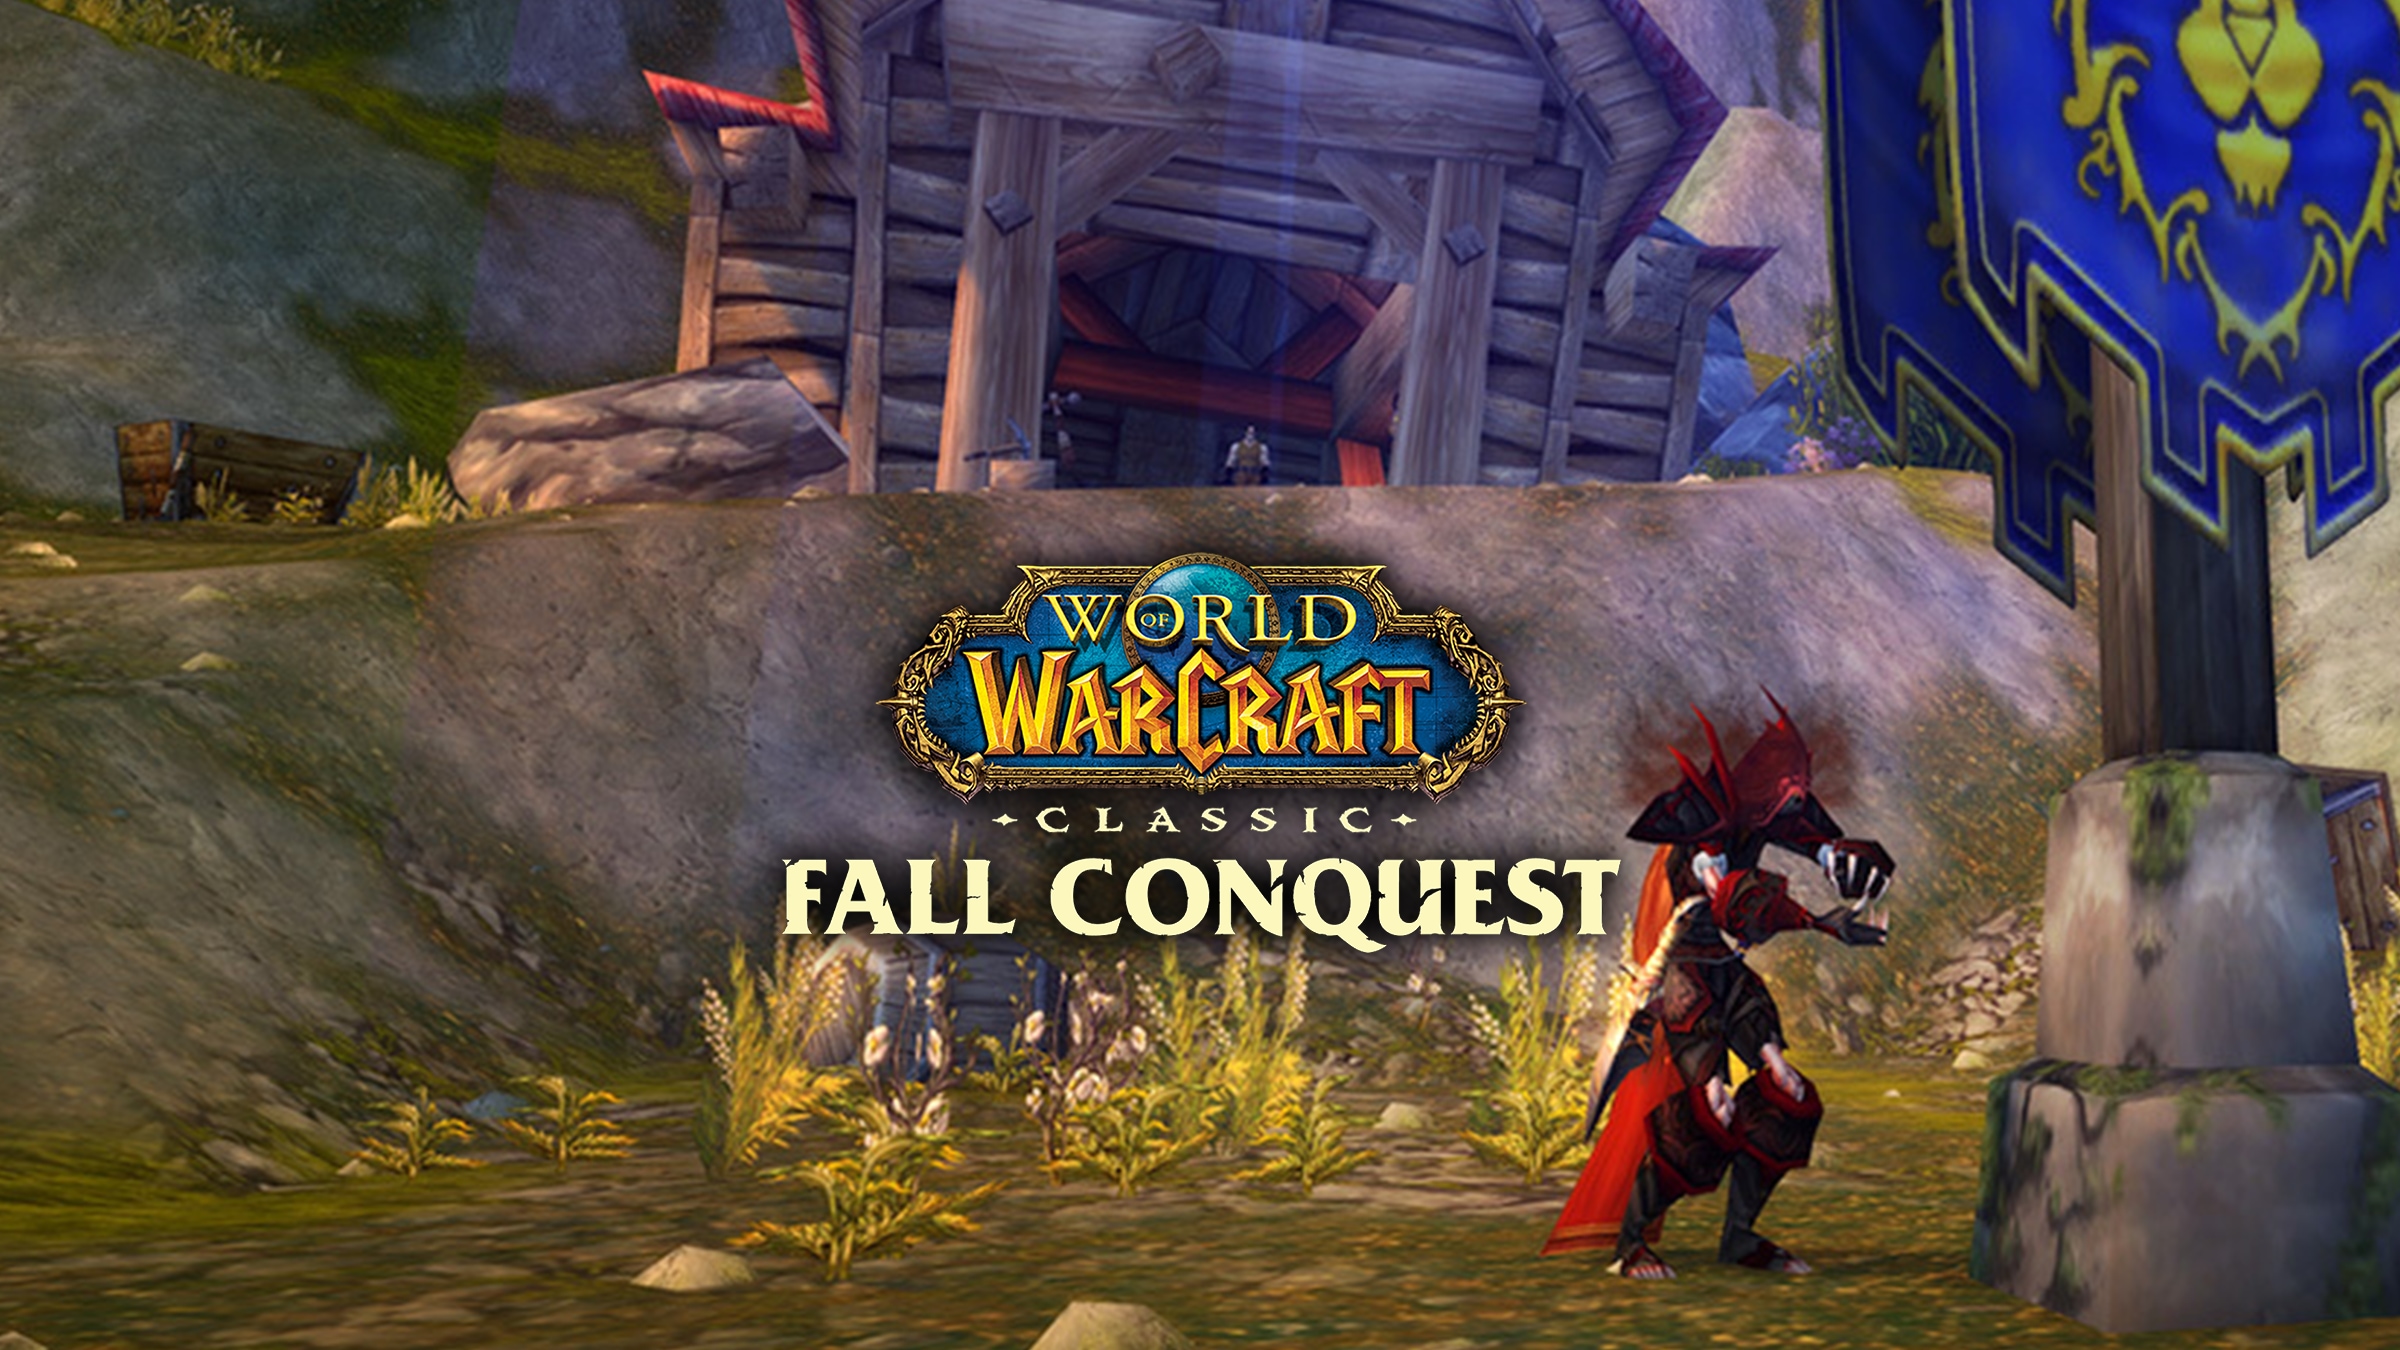 Viewer’s Guide: WoW Classic Fall Conquest